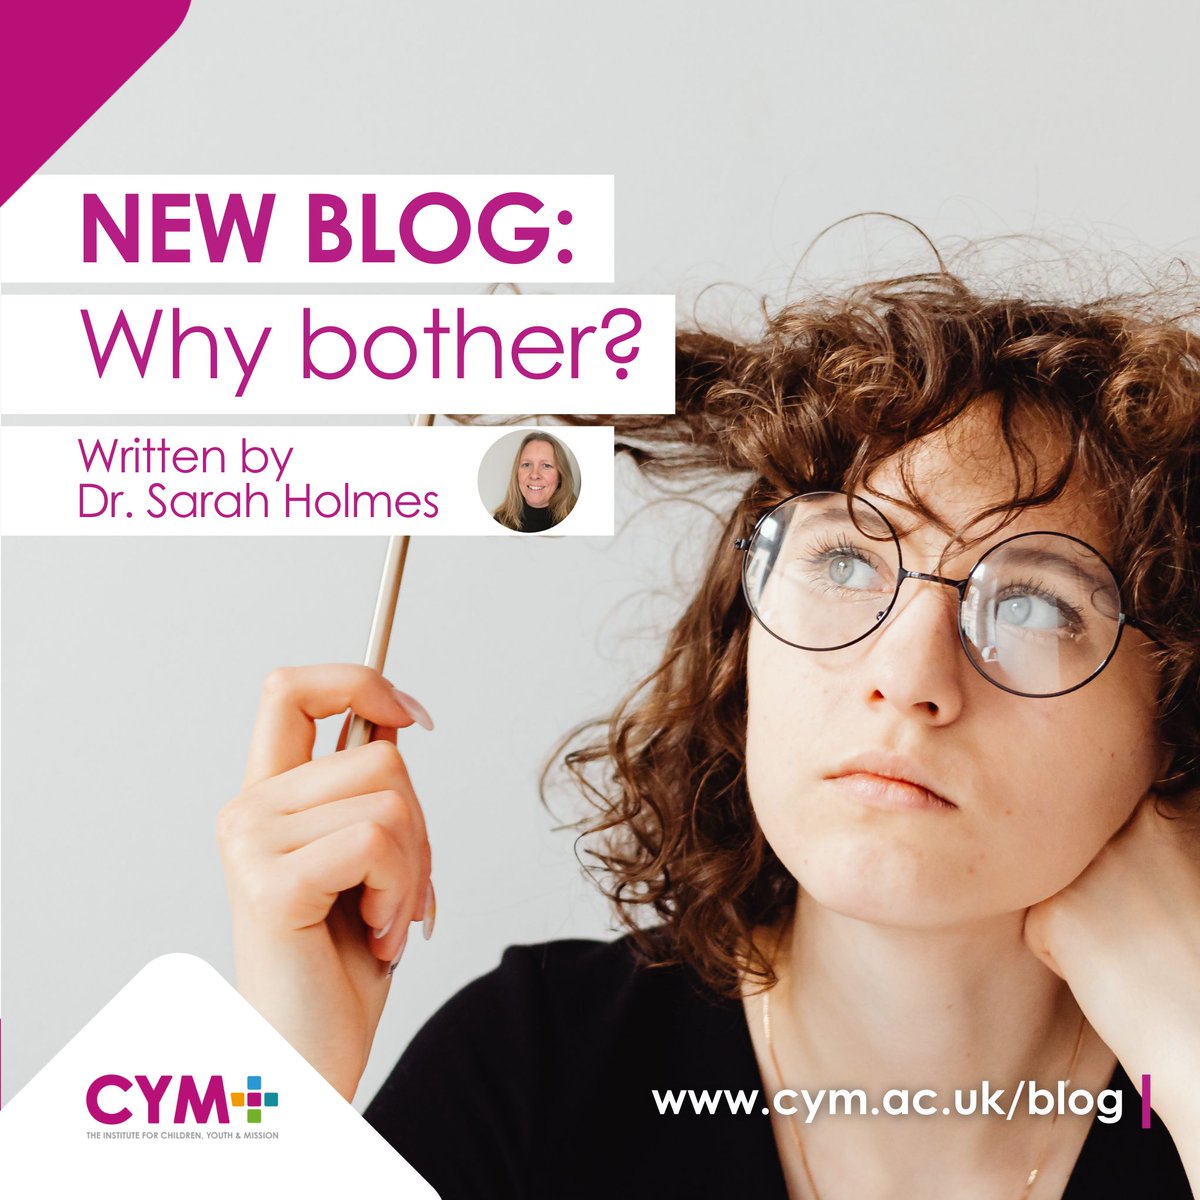 'Why bother?! …. Dr Sarah Holmes, our Research Director, briefly connects these questions to the need to understand why and a way forward in our latest blog post. Click the link in the bio to read the full article.